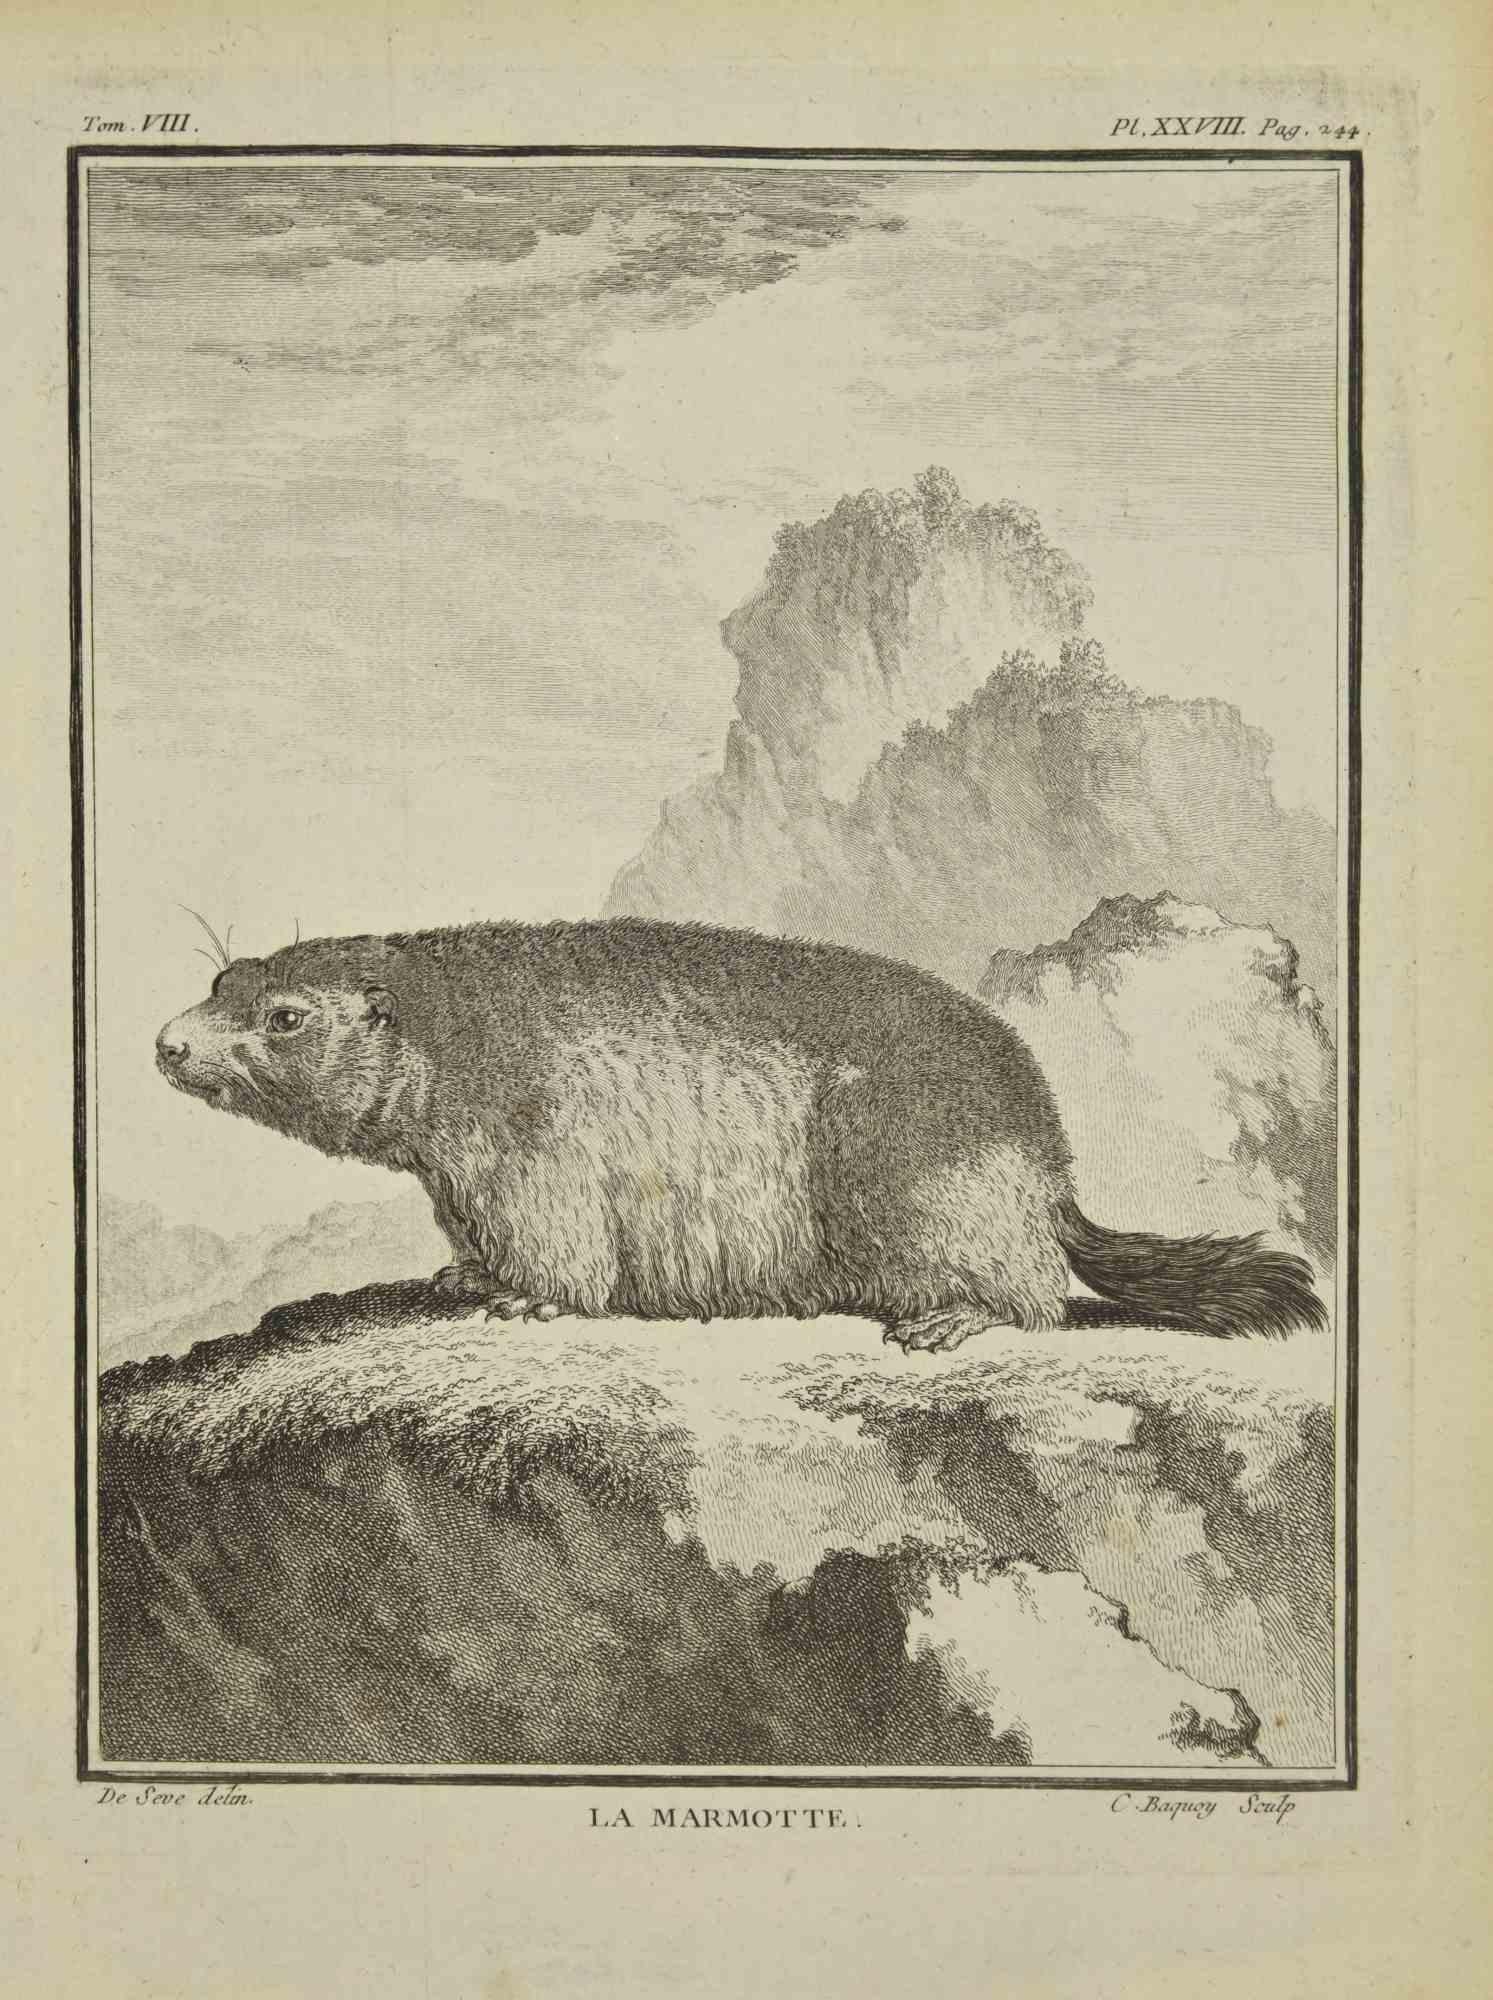 La Marmotte is an etching realized by Jean Charles Baquoy in 1771.

It belongs to the suite "Histoire Naturelle de Buffon".

The Artist's signature is engraved lower right.

Good conditions.